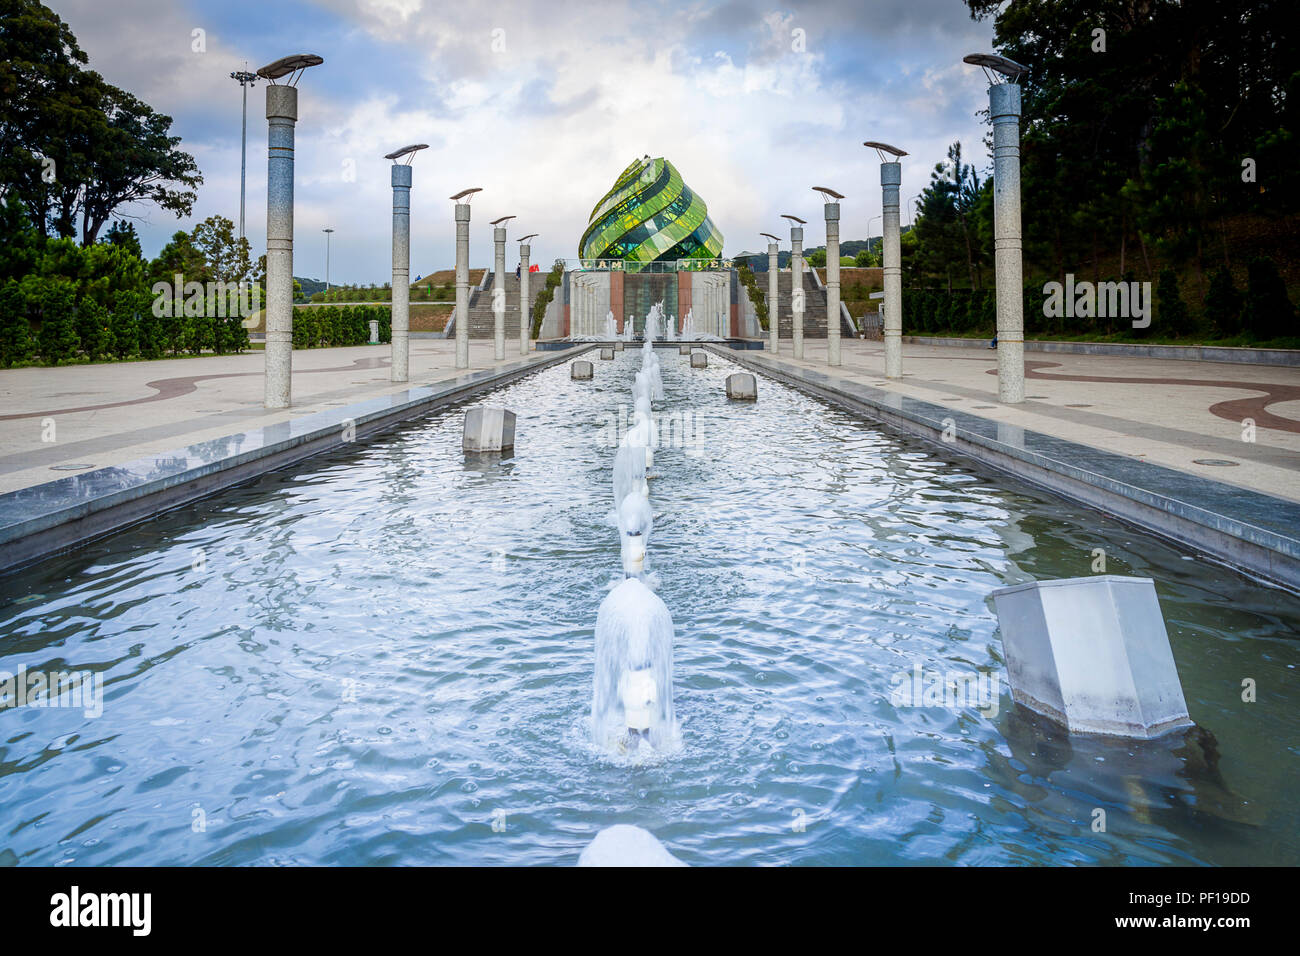 Fountains in front of green dome  at Lam Vien Square in Dalat, Vietnam. Stock Photo